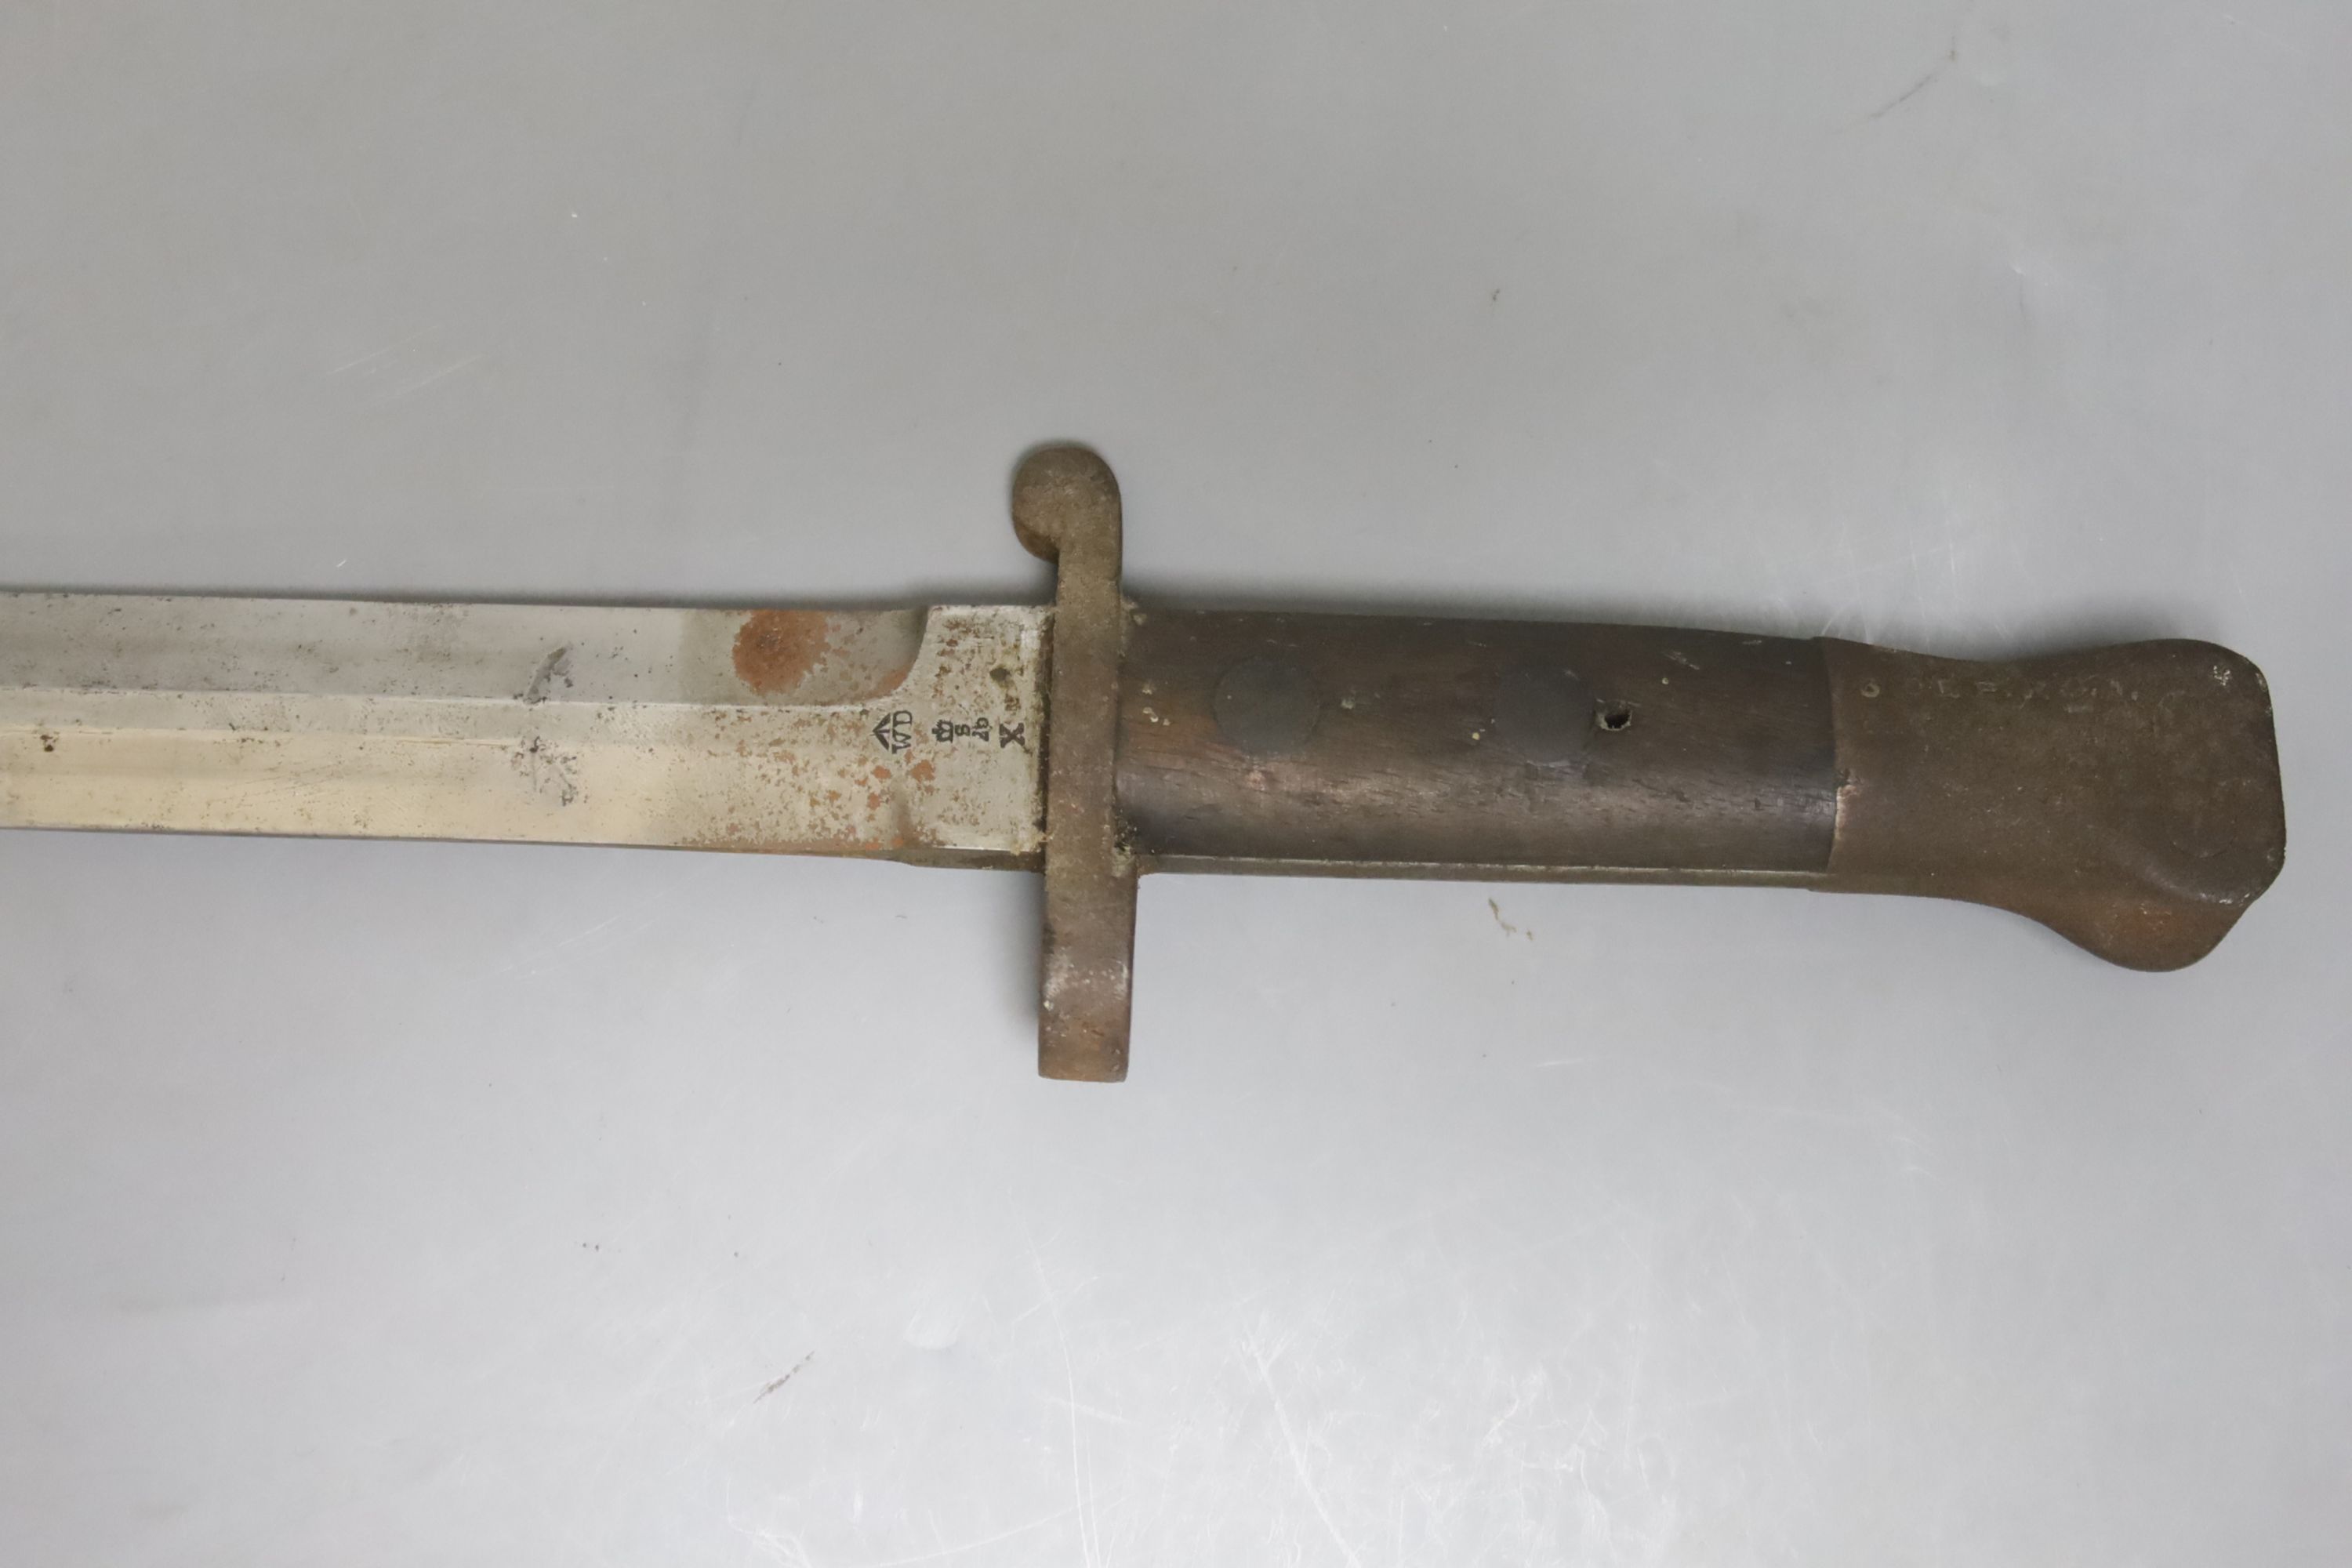 A 19th century French bayonet, together with an early 20th century English bayonet and a ‘Remember The Alamo 1836 The Stand of Colonel Jim' Bowie knife